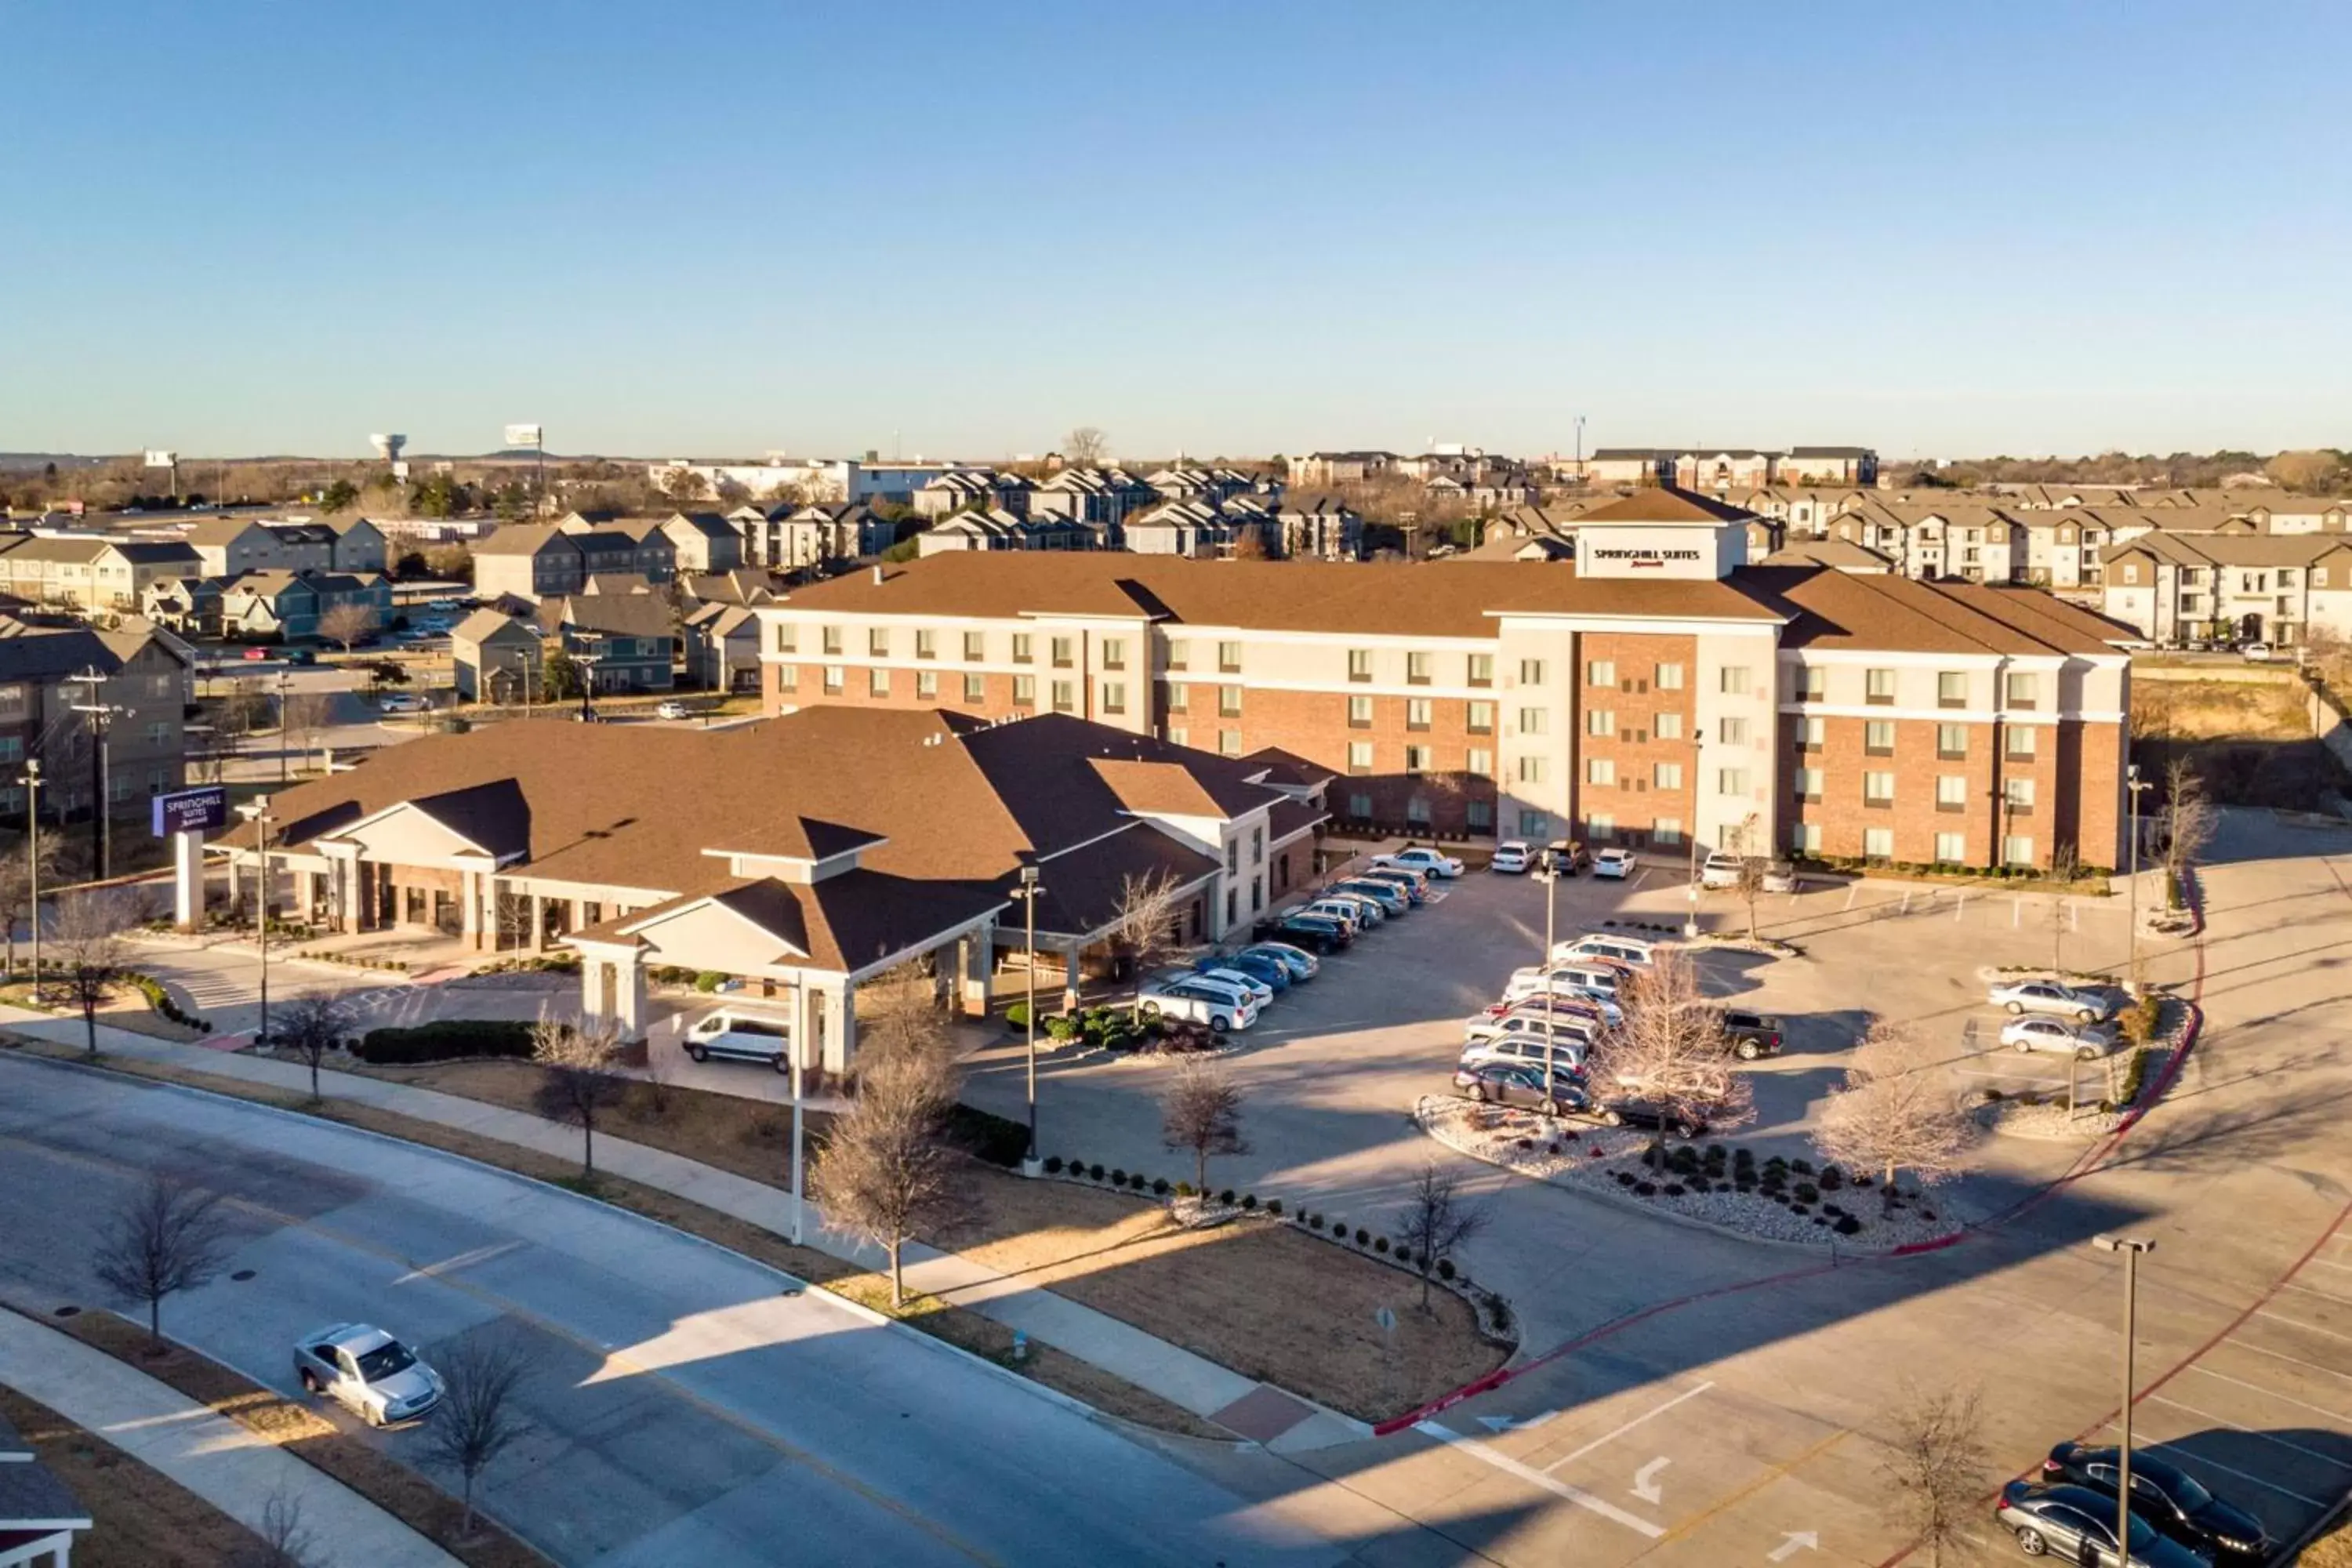 Property building, Bird's-eye View in SpringHill Suites by Marriott Denton